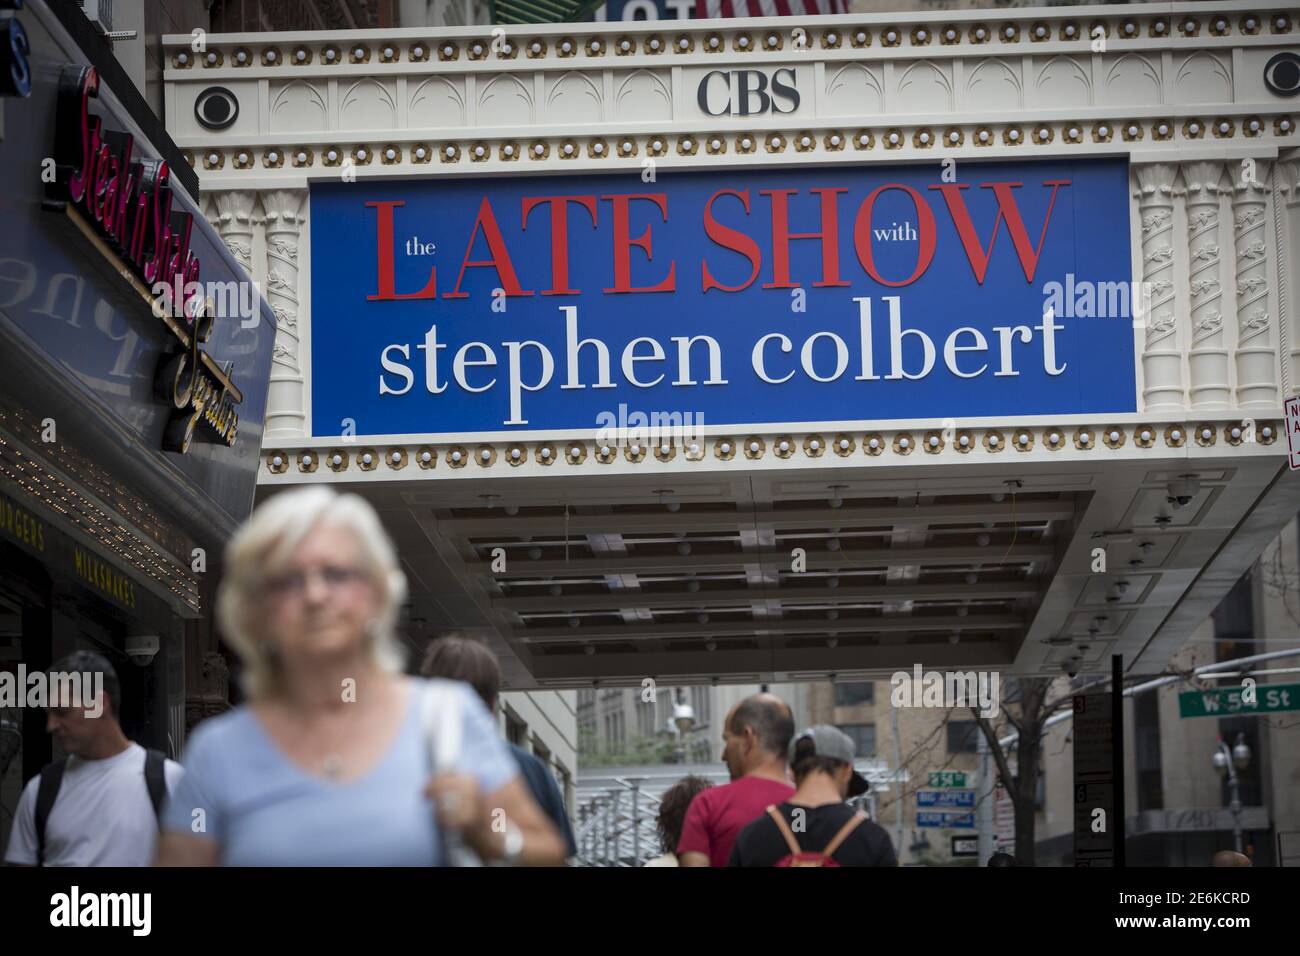 The marquee for 'The Late Show with Stephen Colbert' is seen on the Ed Sullivan Theater in Manhattan, New York, August 21, 2015. Colbert is set to host the show, which was previously presented by David Letterman. REUTERS/Andrew Kelly Stock Photo